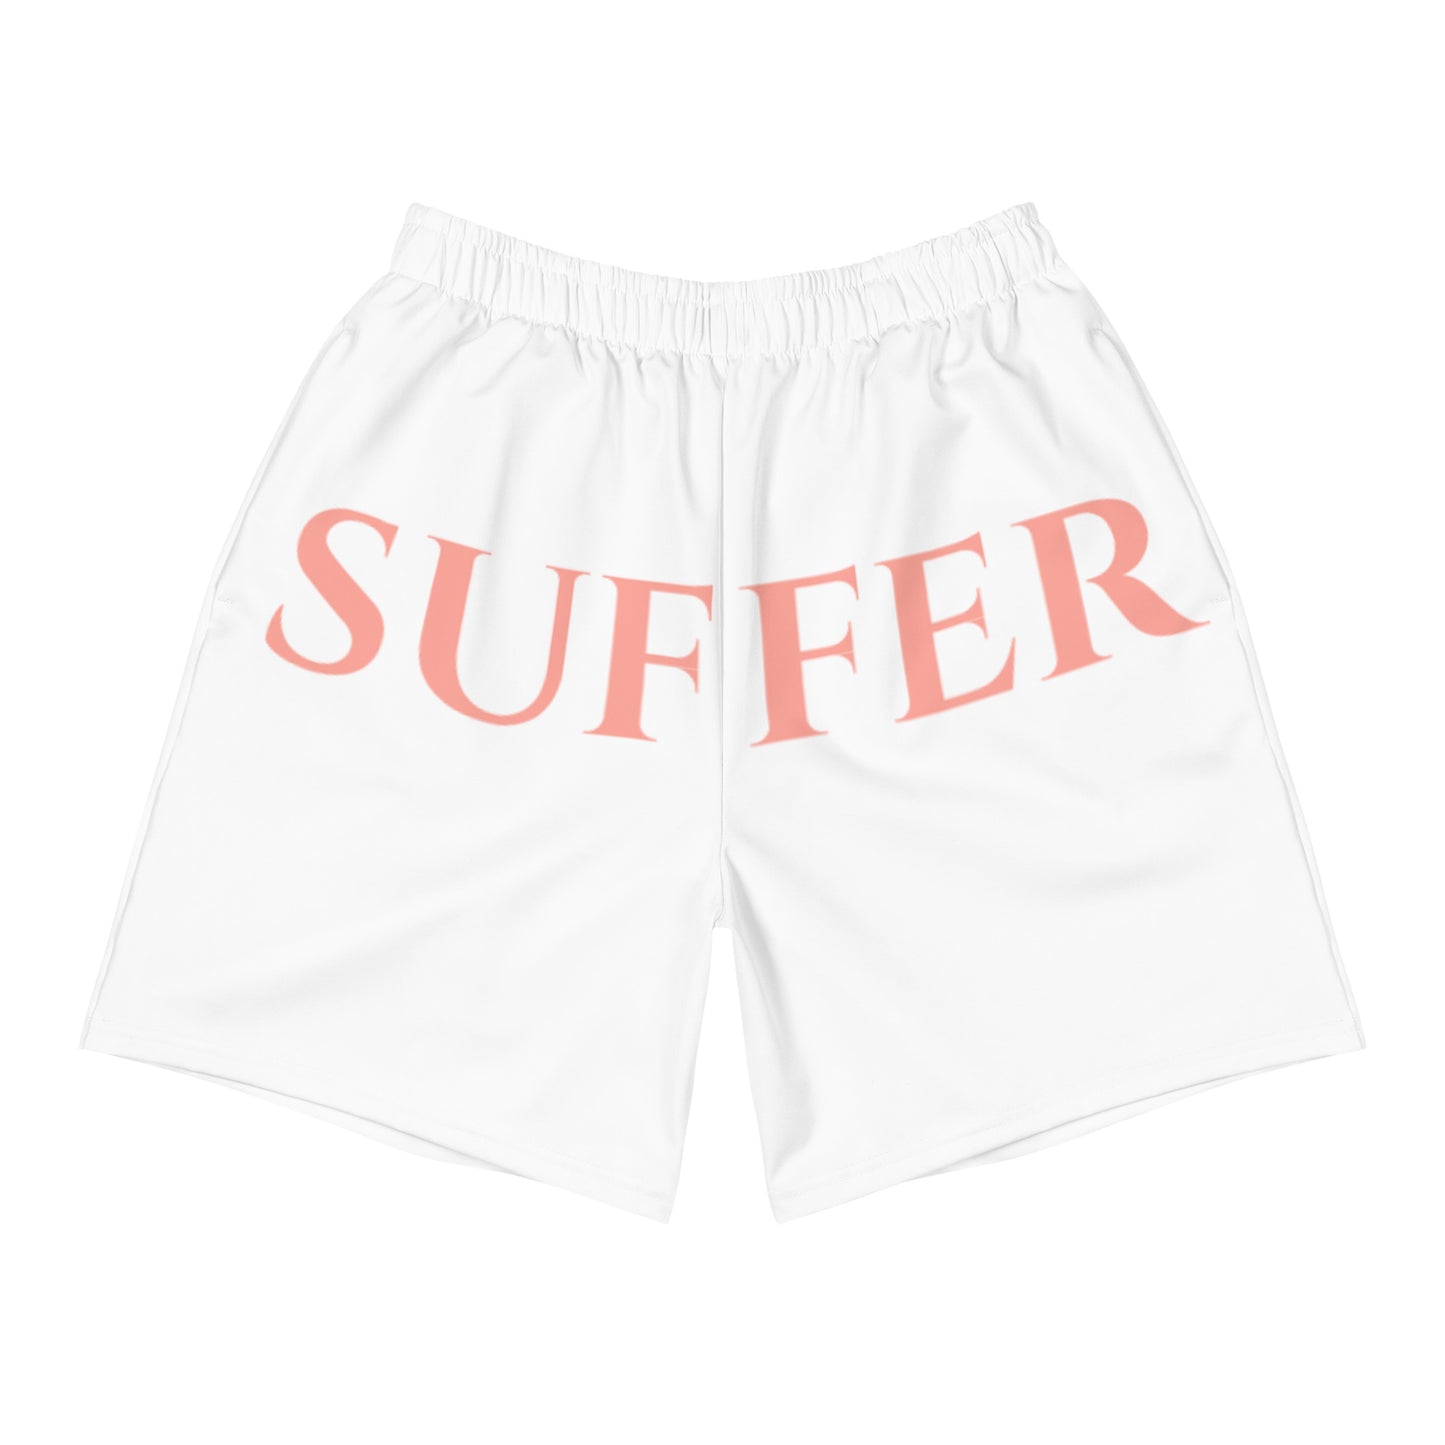 Wht/Dusty Rose Hip Suffer Athletic Shorts